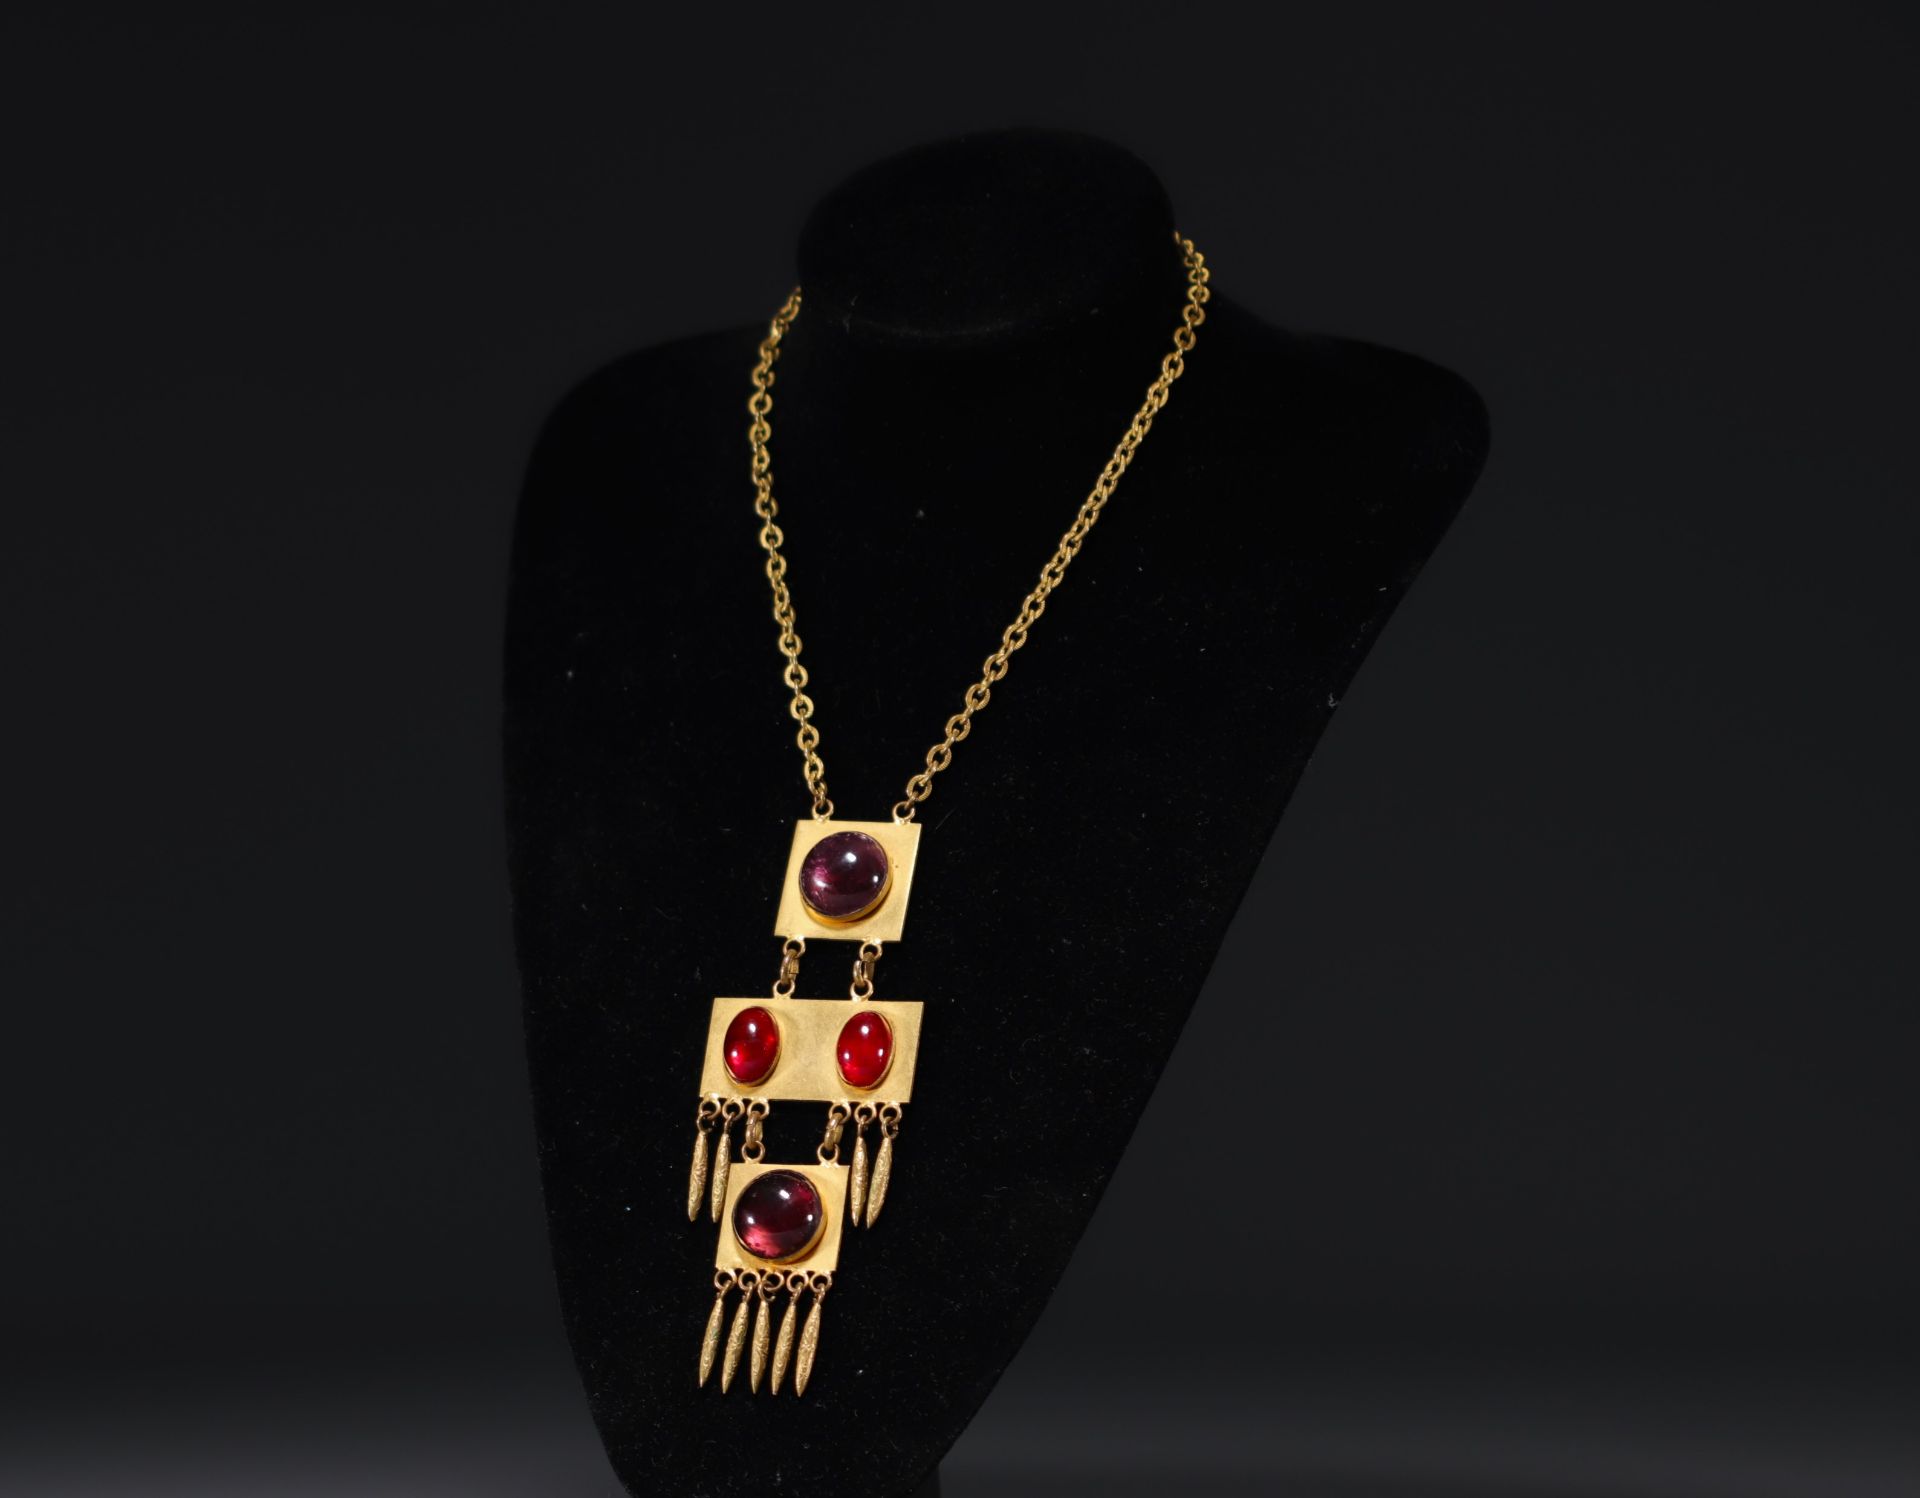 Roger SCEMAMA (1898-1989) attr. to for Yves Saint Laurent, necklace in gilt metal and glass cabochon